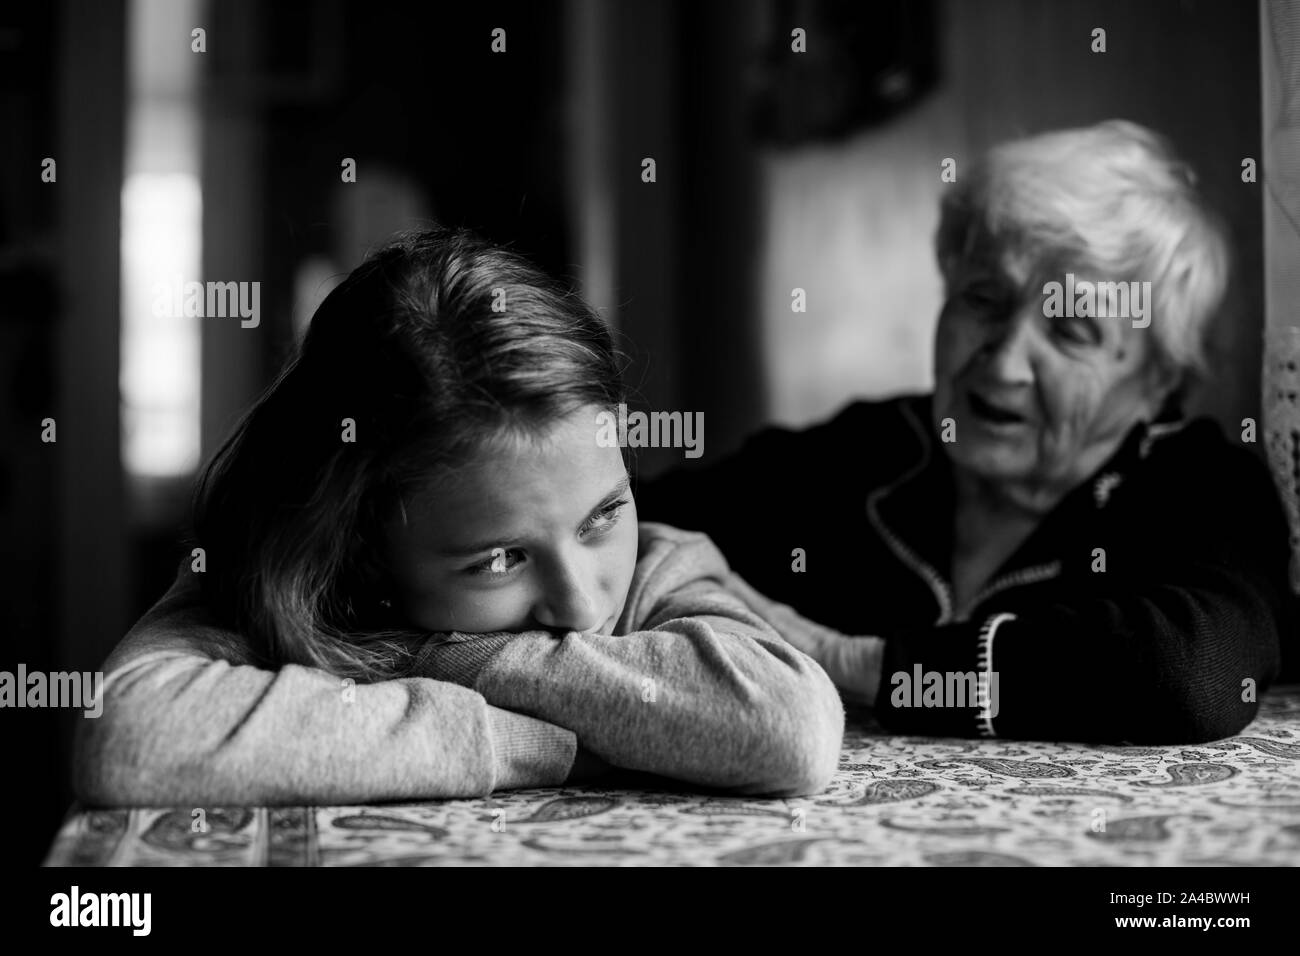 Little girl sad and grandmother soothes her. Black and white photo. Stock Photo